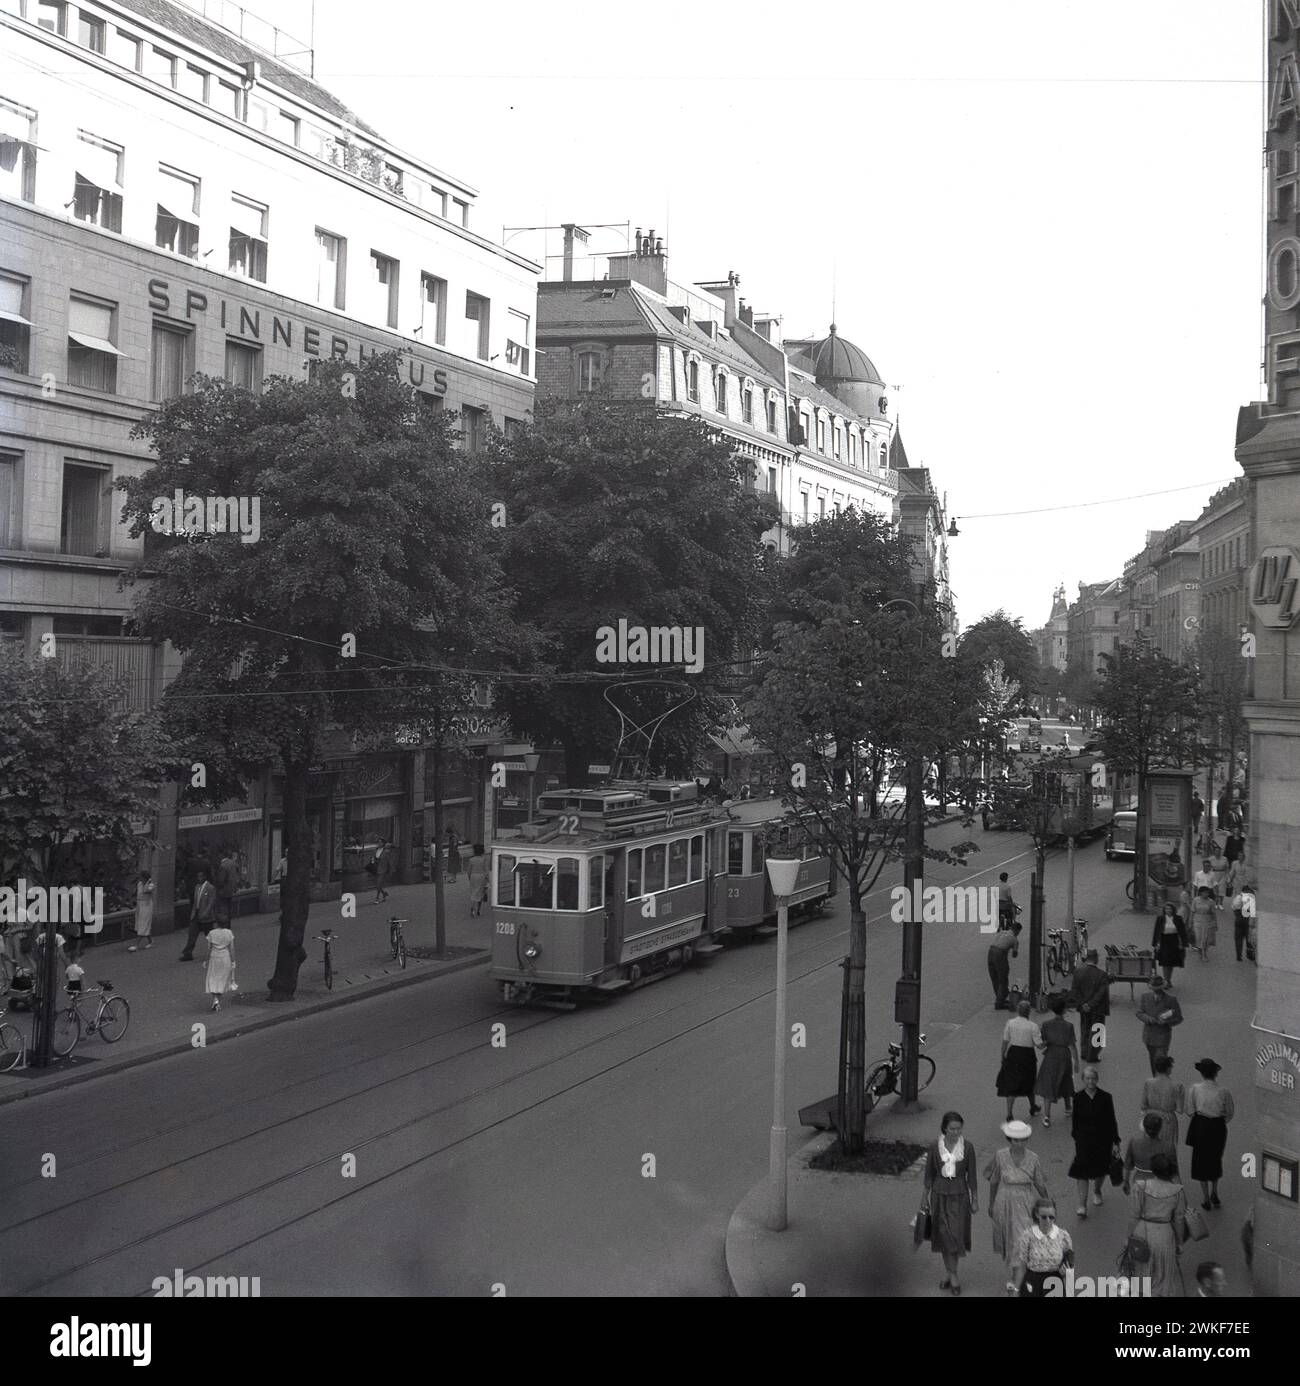 1960s, historical, street scene, showing people and a tram on the tree-lined Bahnhofstrasse in Zurich, Switzerland. Seen in the picture, the Spinnerhaus building. Located downtown, the street dates back to 1864 and is an important link in the Zurich tram network. Stock Photo